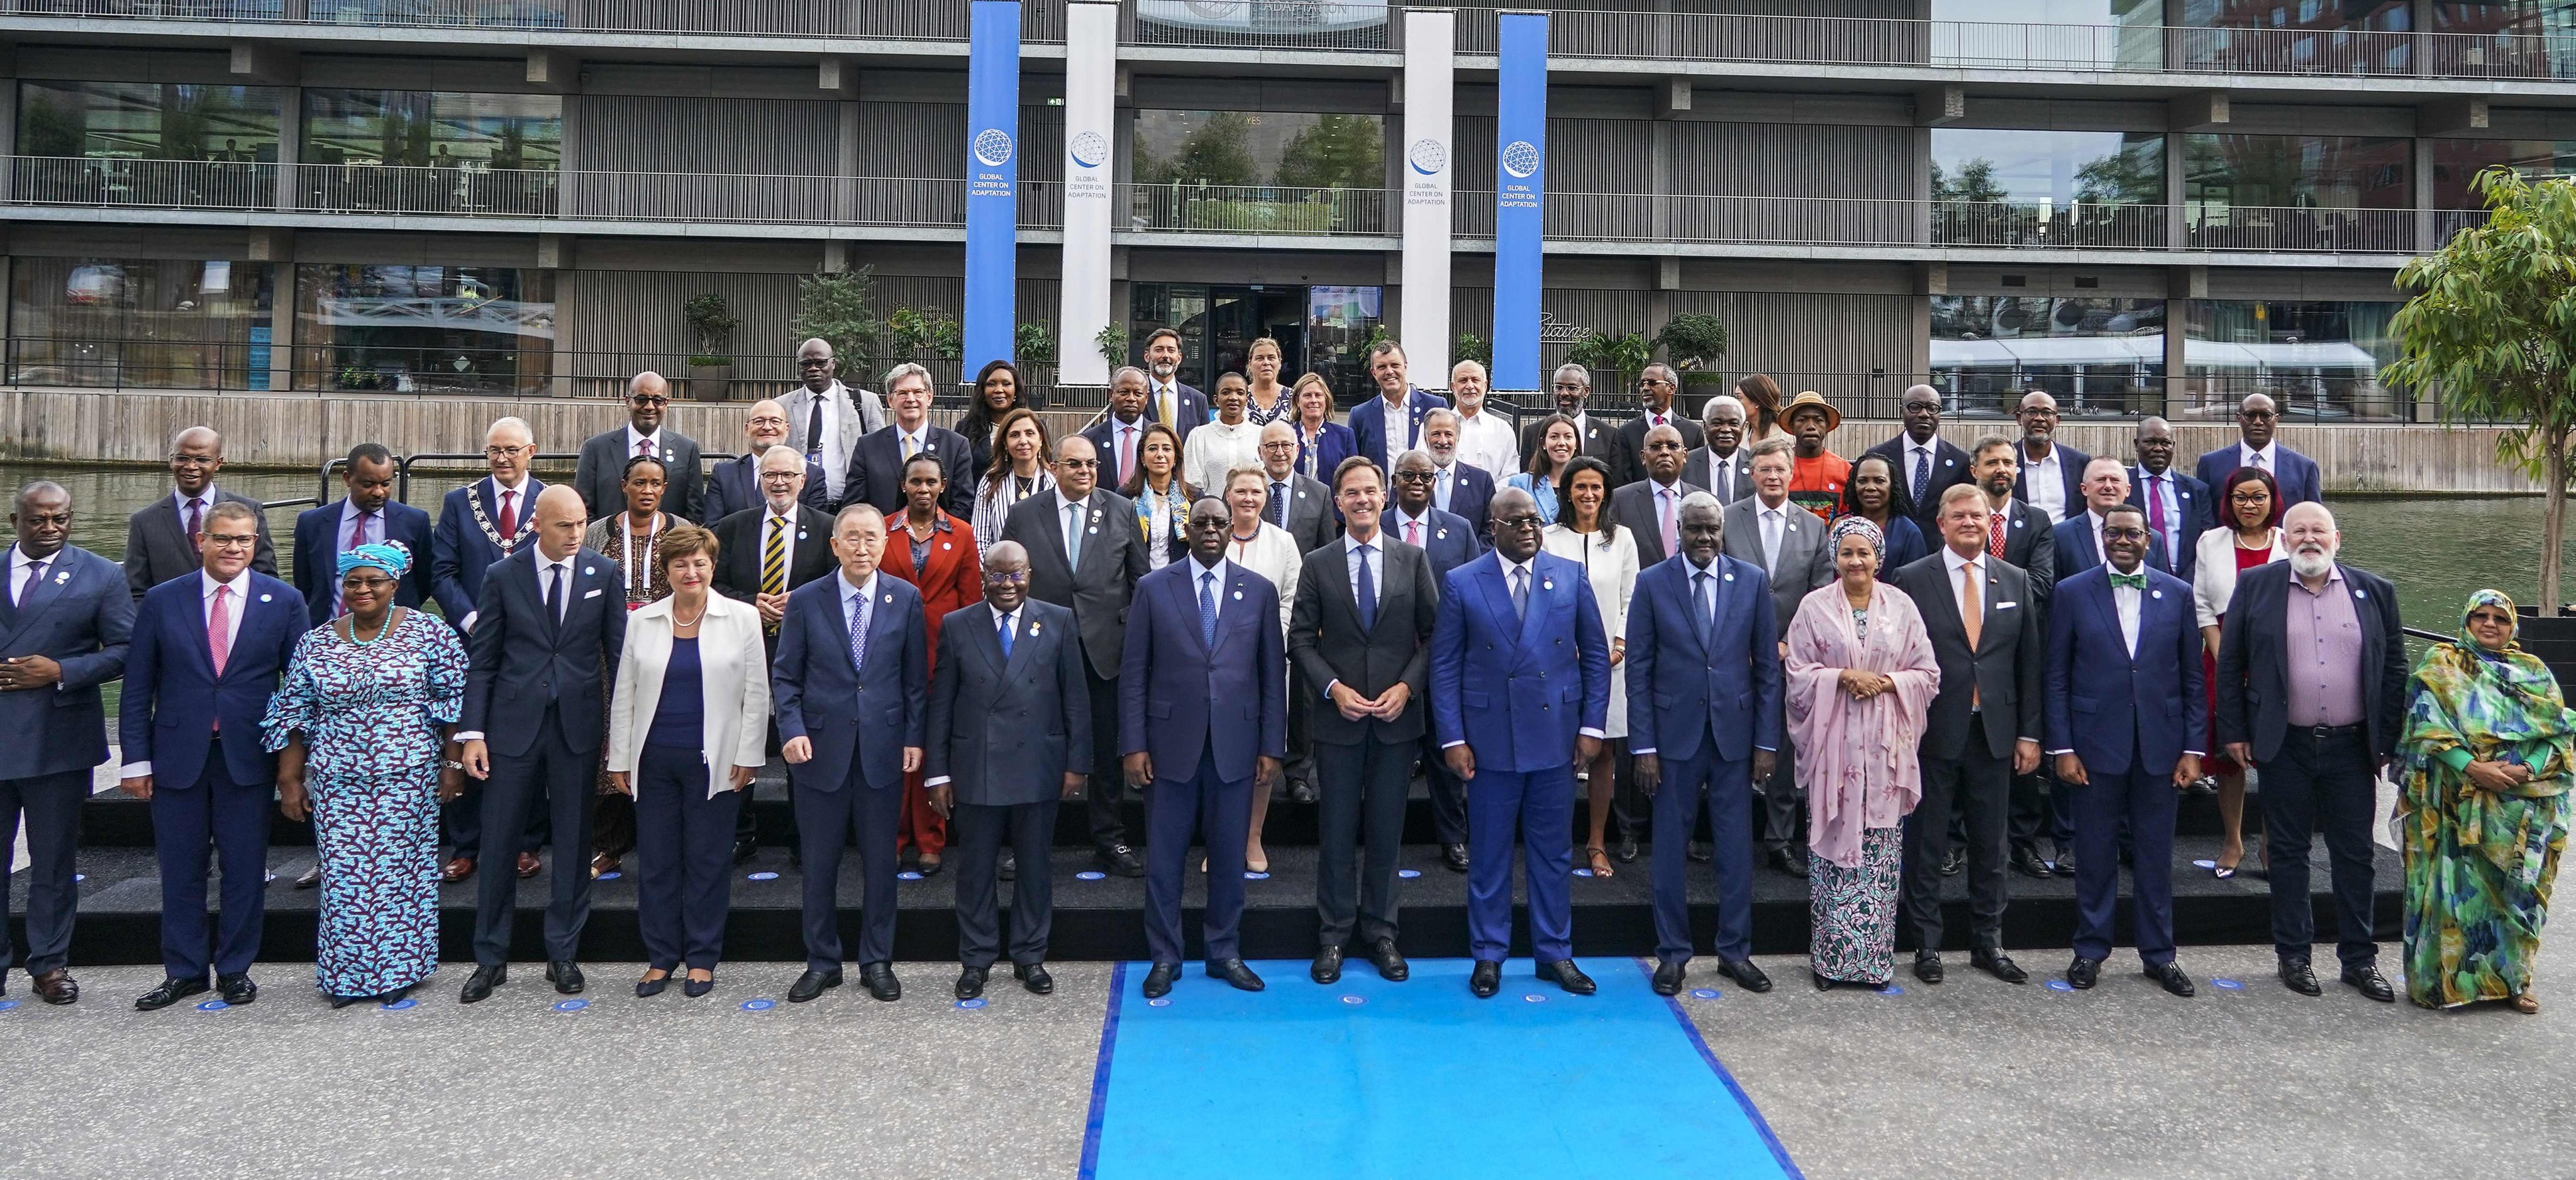 Attendees pose for a group photograph at the Africa Adaptation Summit in Rotterdam, where African attendees complained about a lack of European interest. Photo: AFP